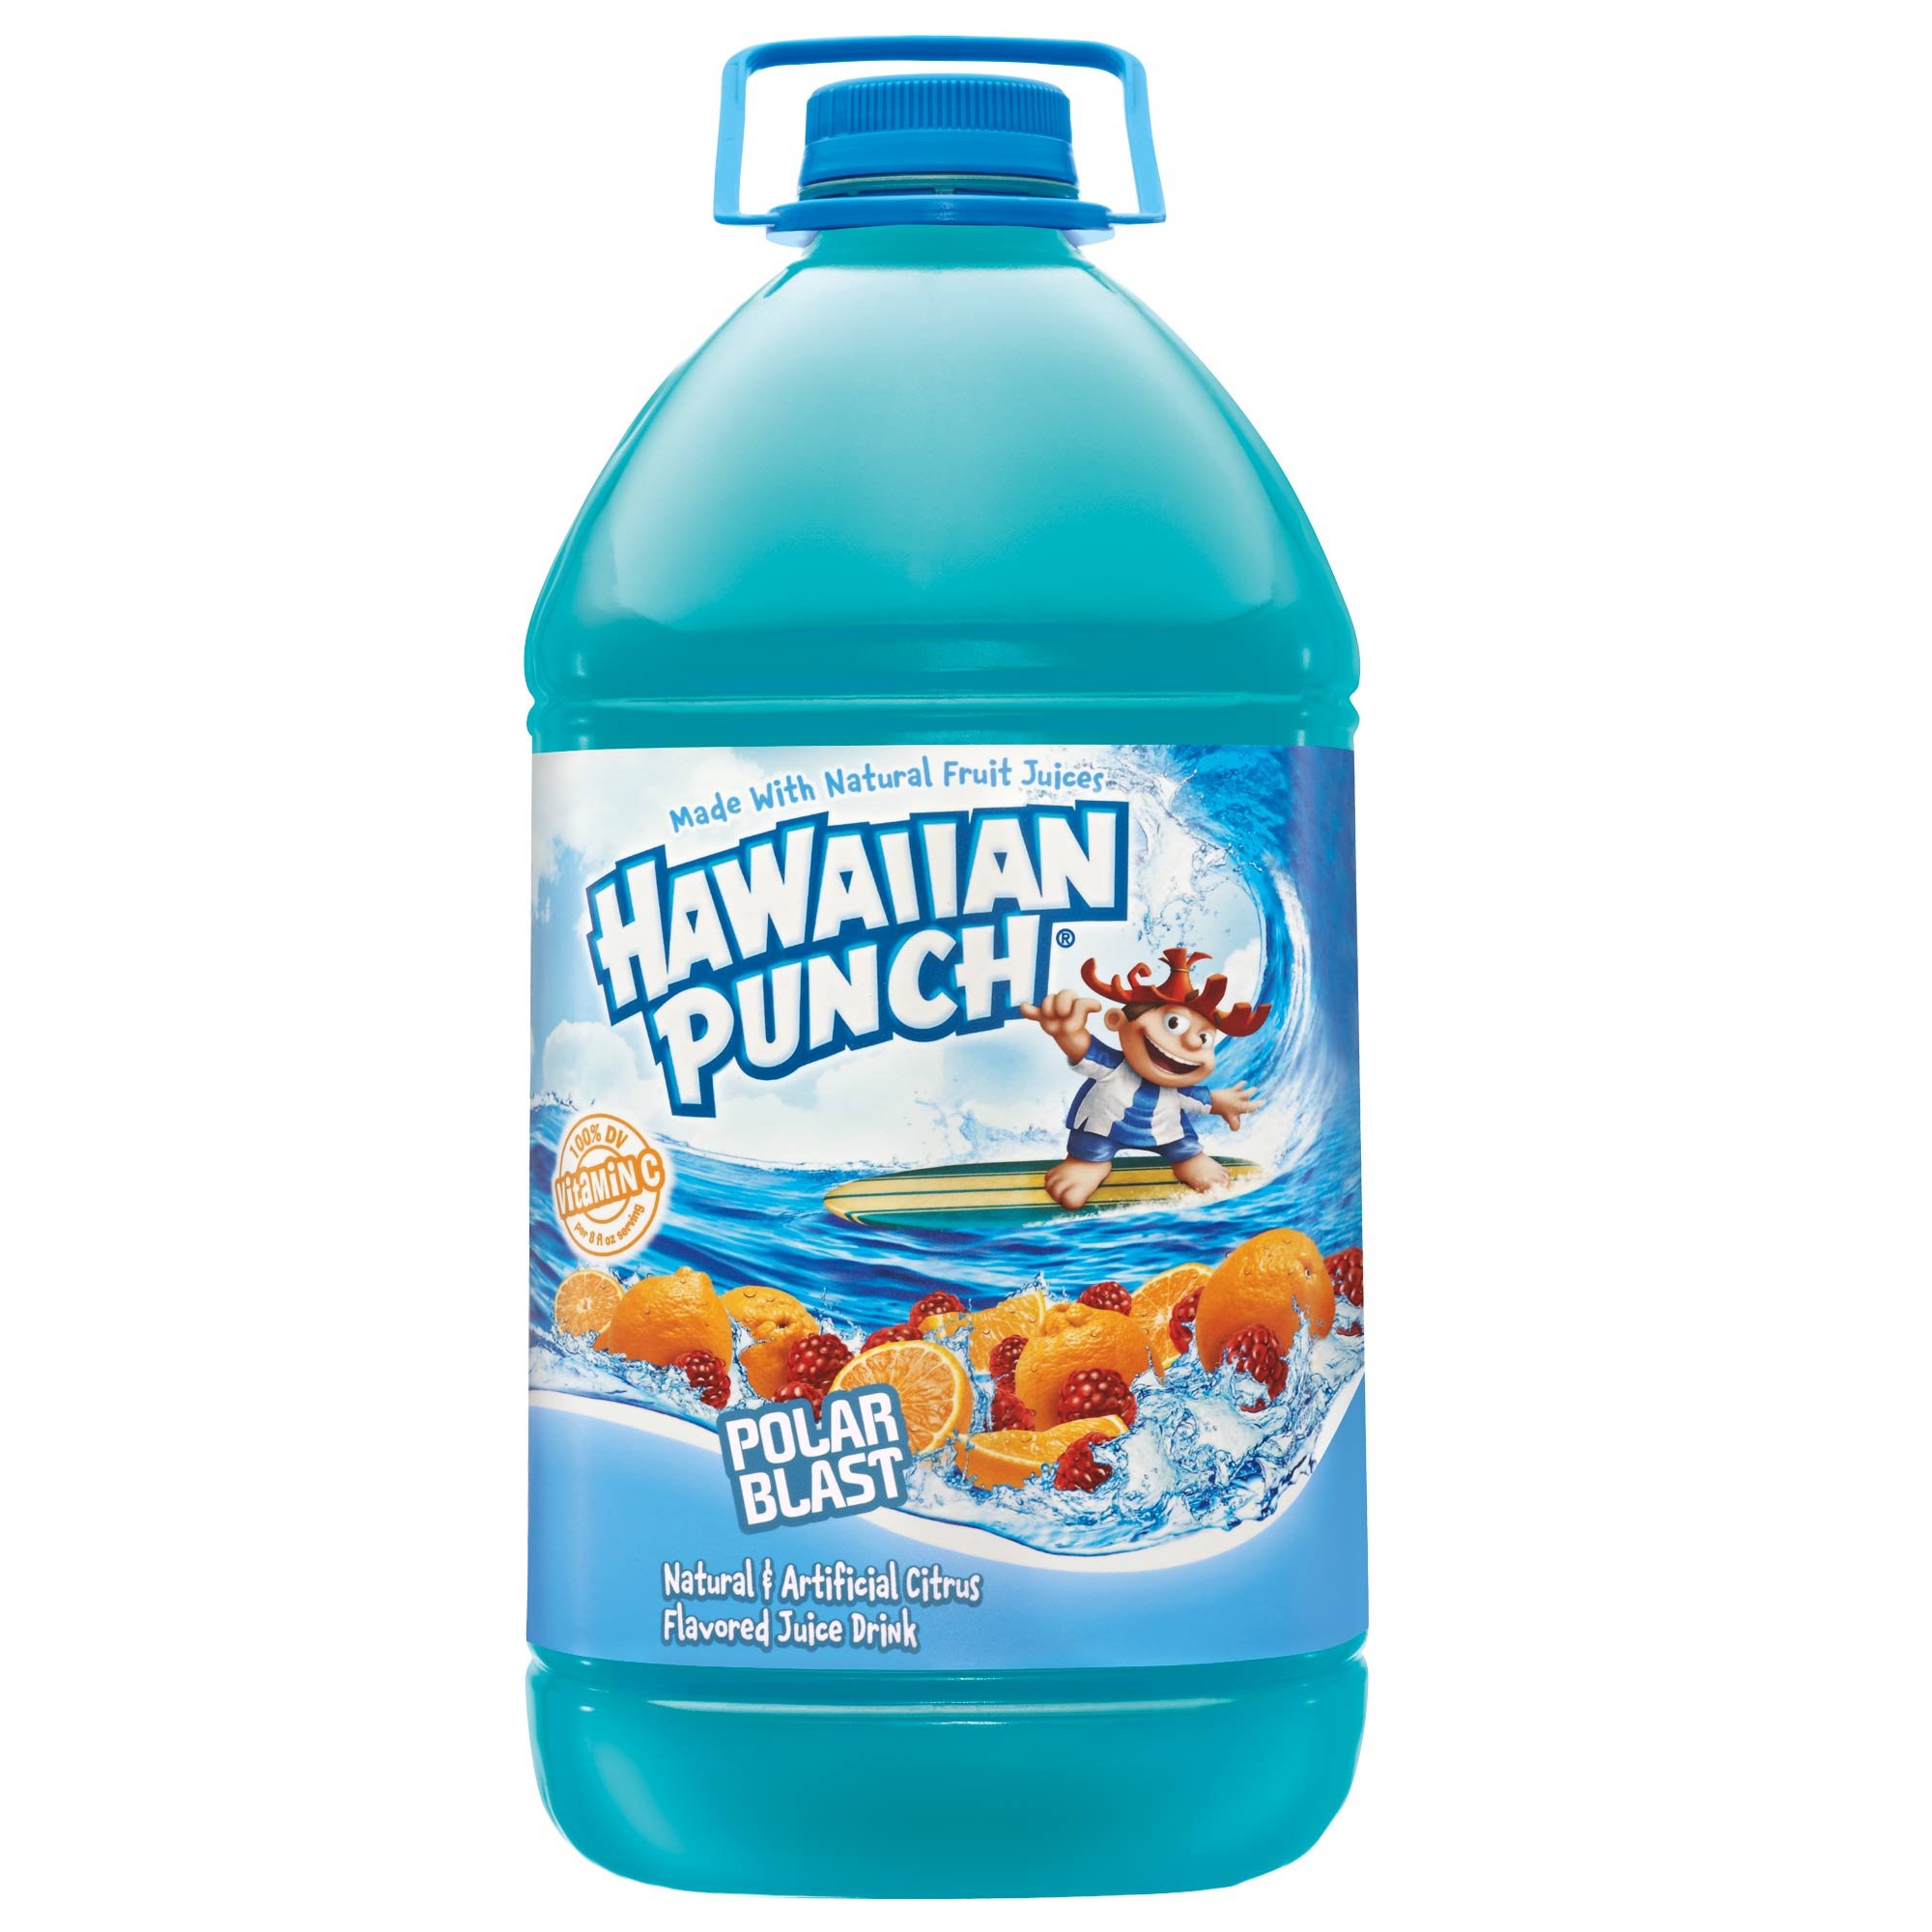 4-Pack 1-Gallon Hawaiian Punch Drink Bottle (Polar Blast) $7.78 w/ S&S + Free Shipping w/ Prime or on $35+